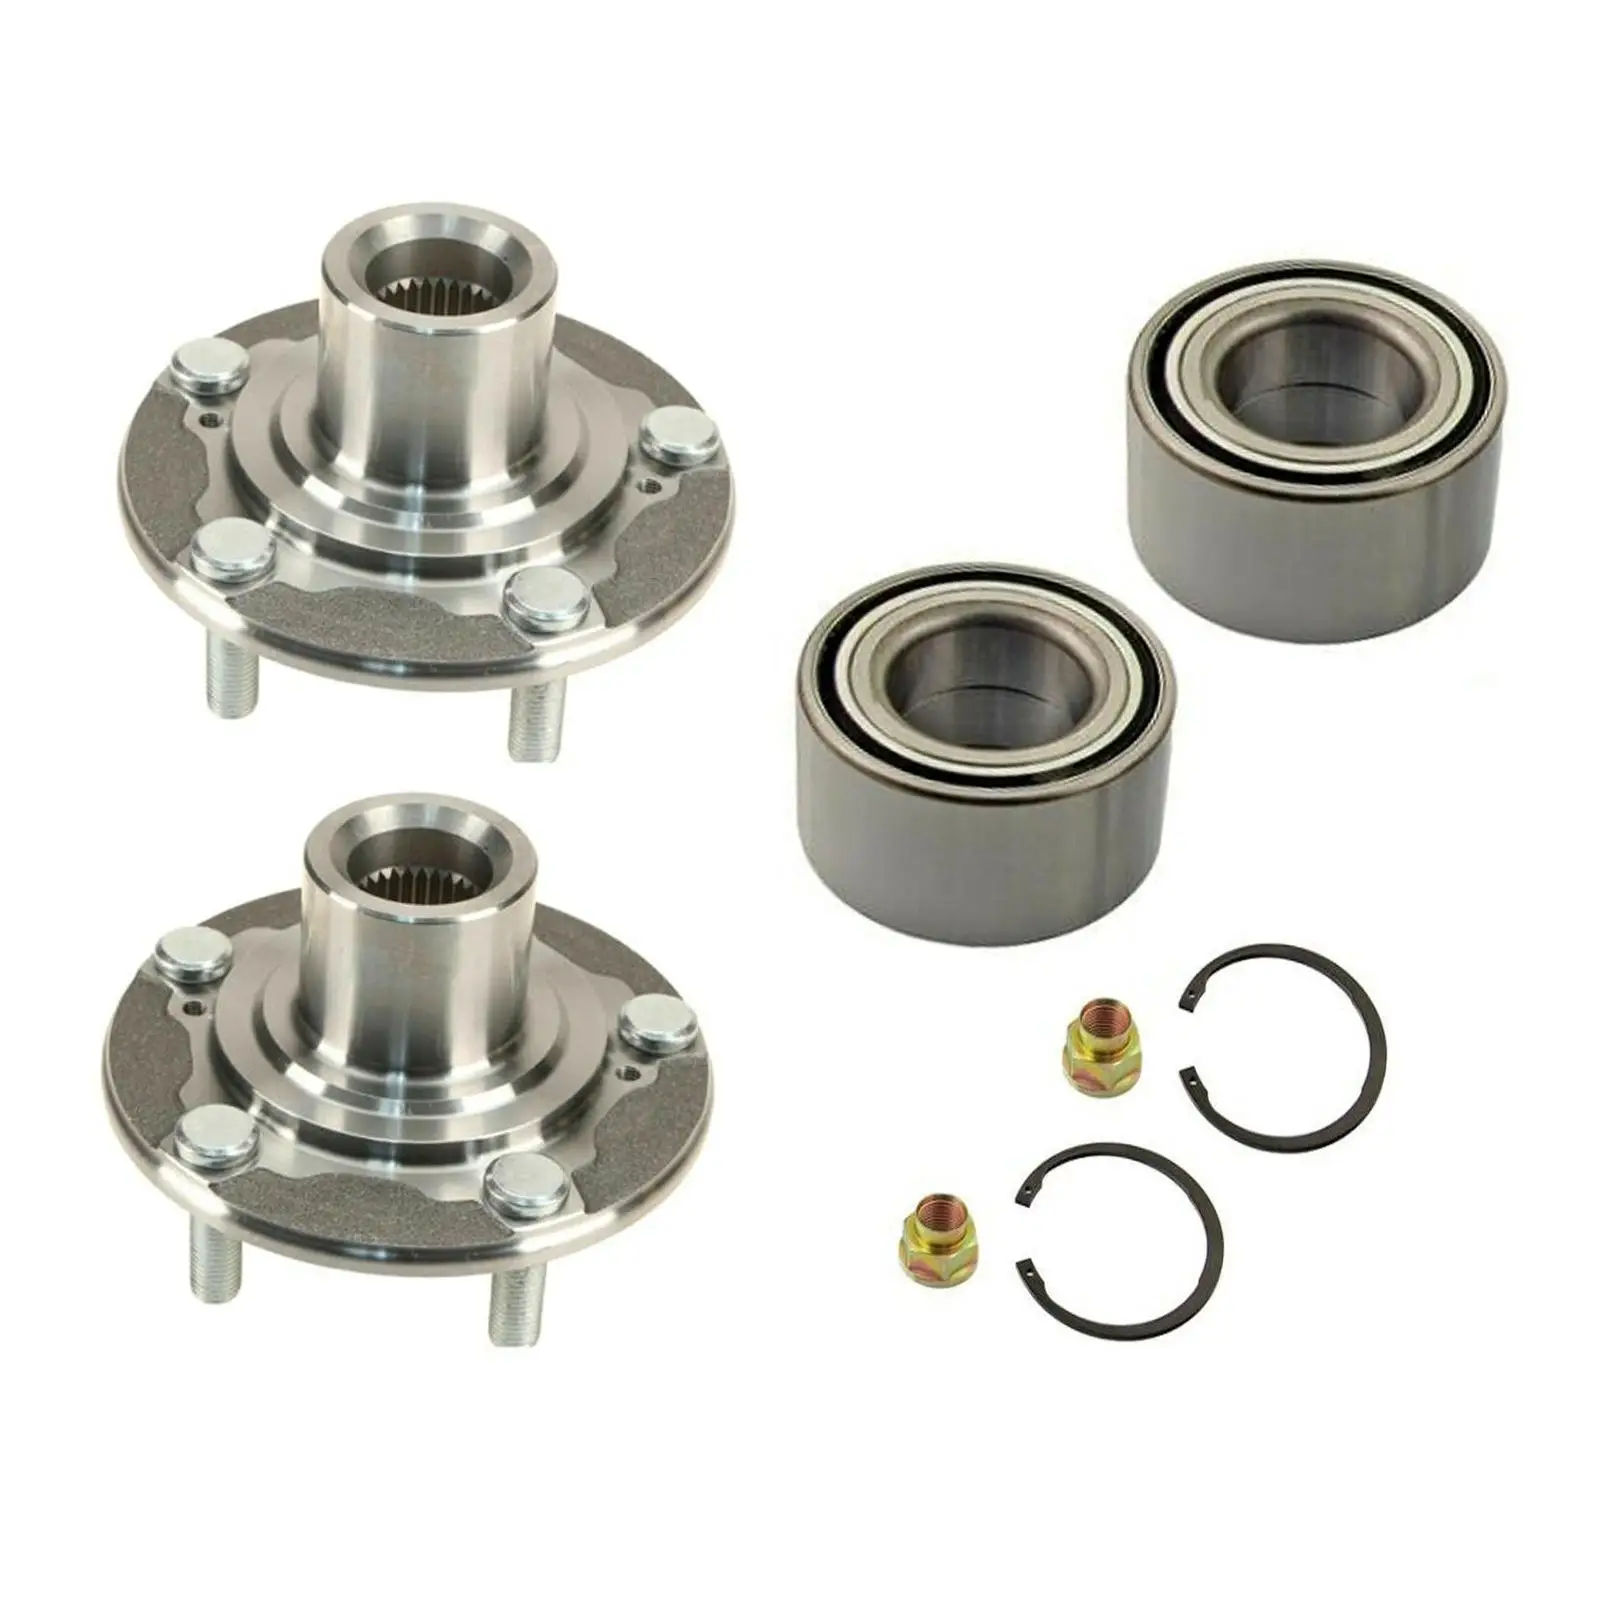 2x Front Wheel Hub and Bearing Repair Kits Replacement Easy Installation 510118 44600-t2f-a01 for Honda Acura Tlx 2015-2019